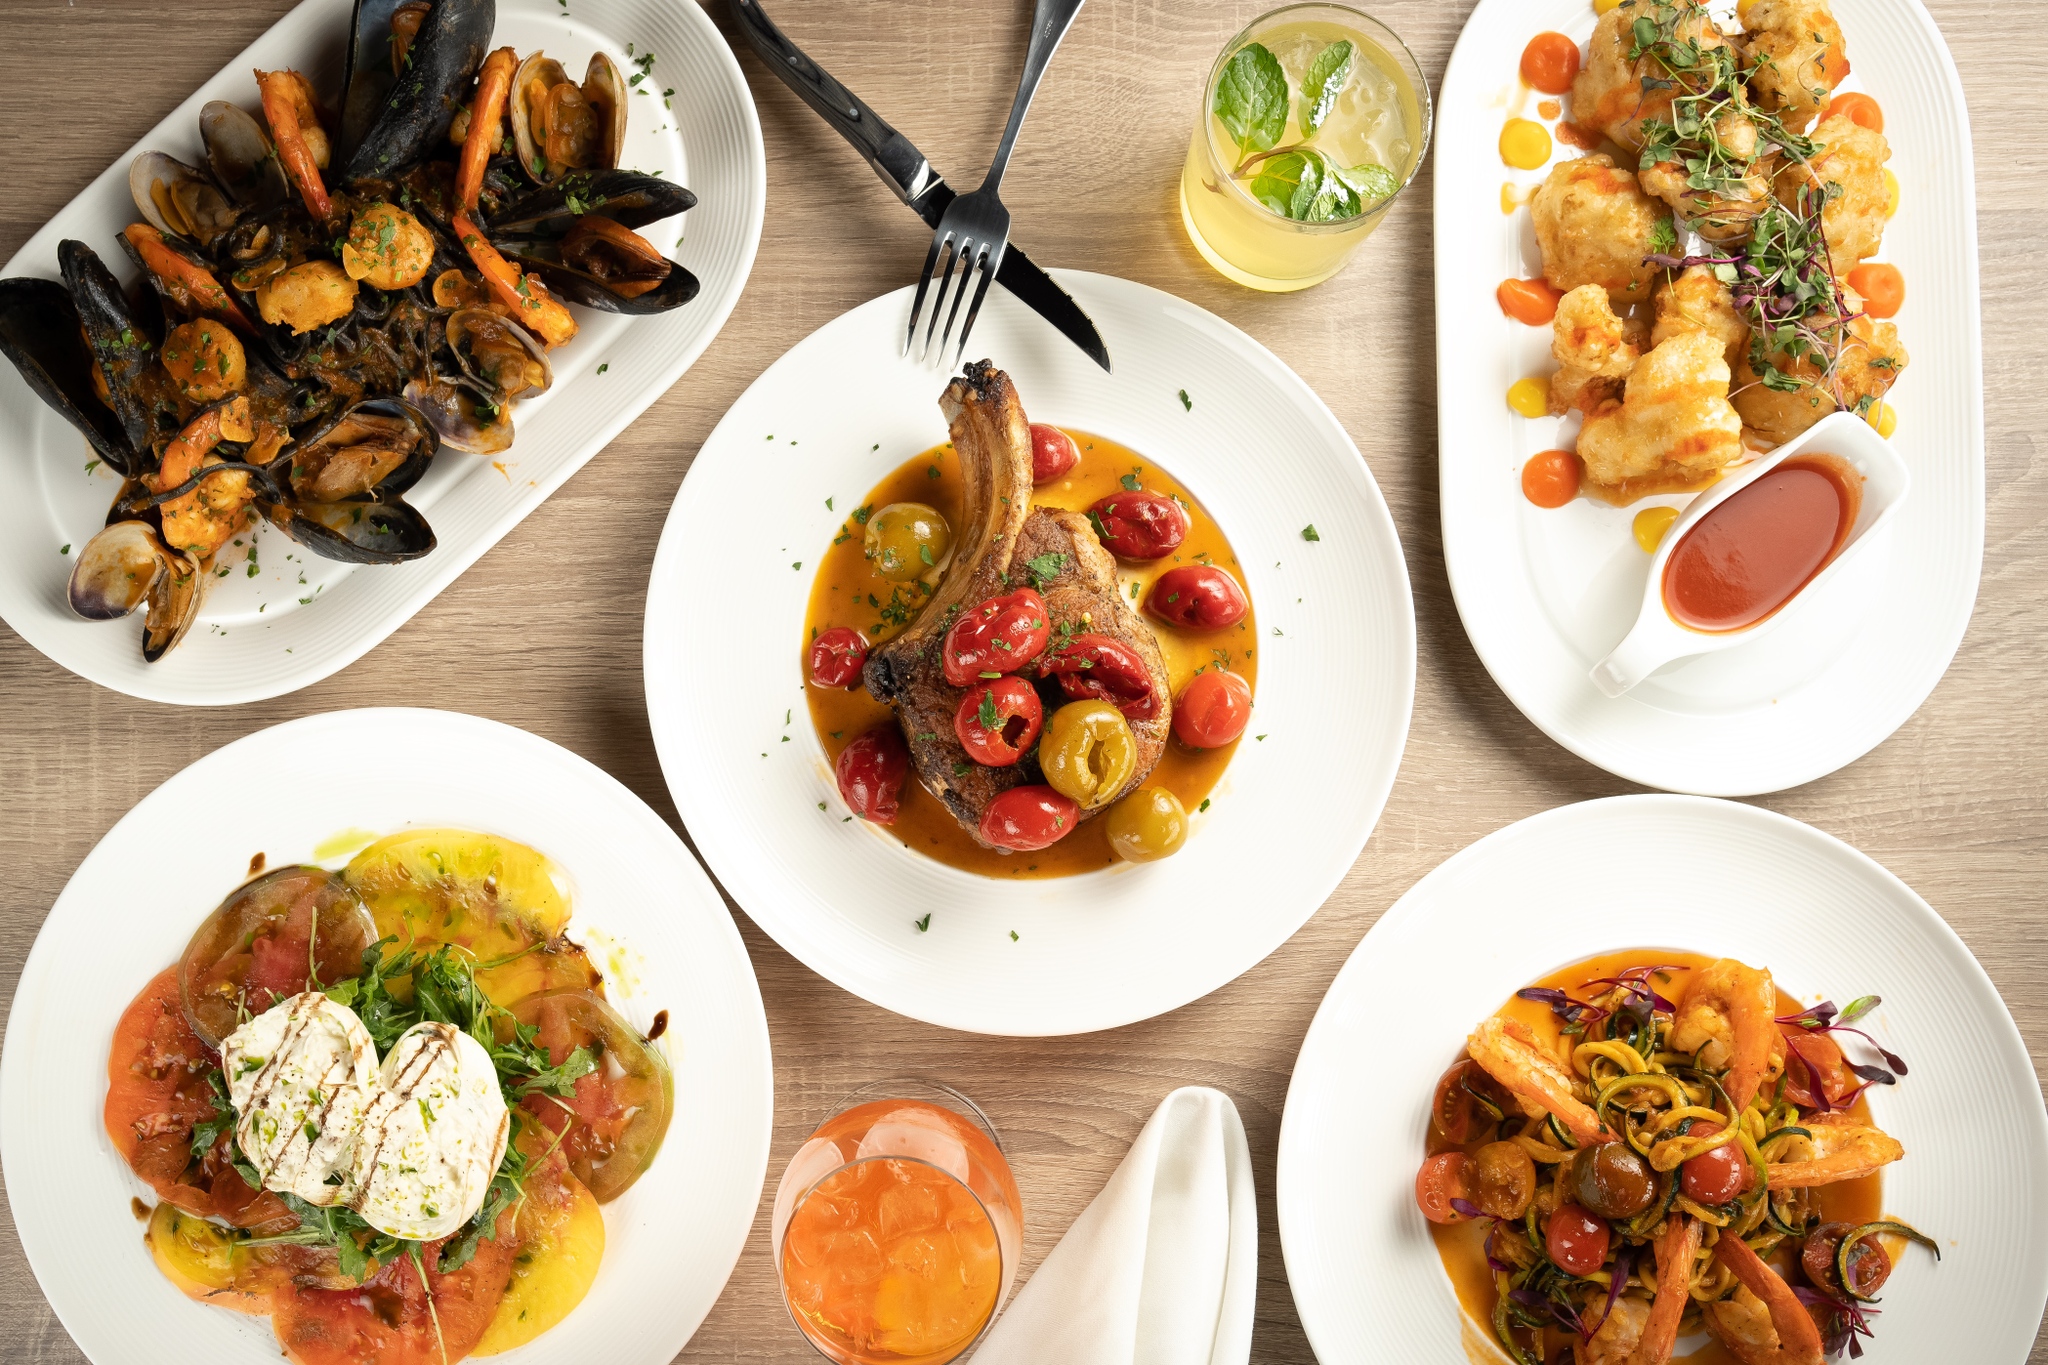 A spread of Italian dishes with pasta and seafood.